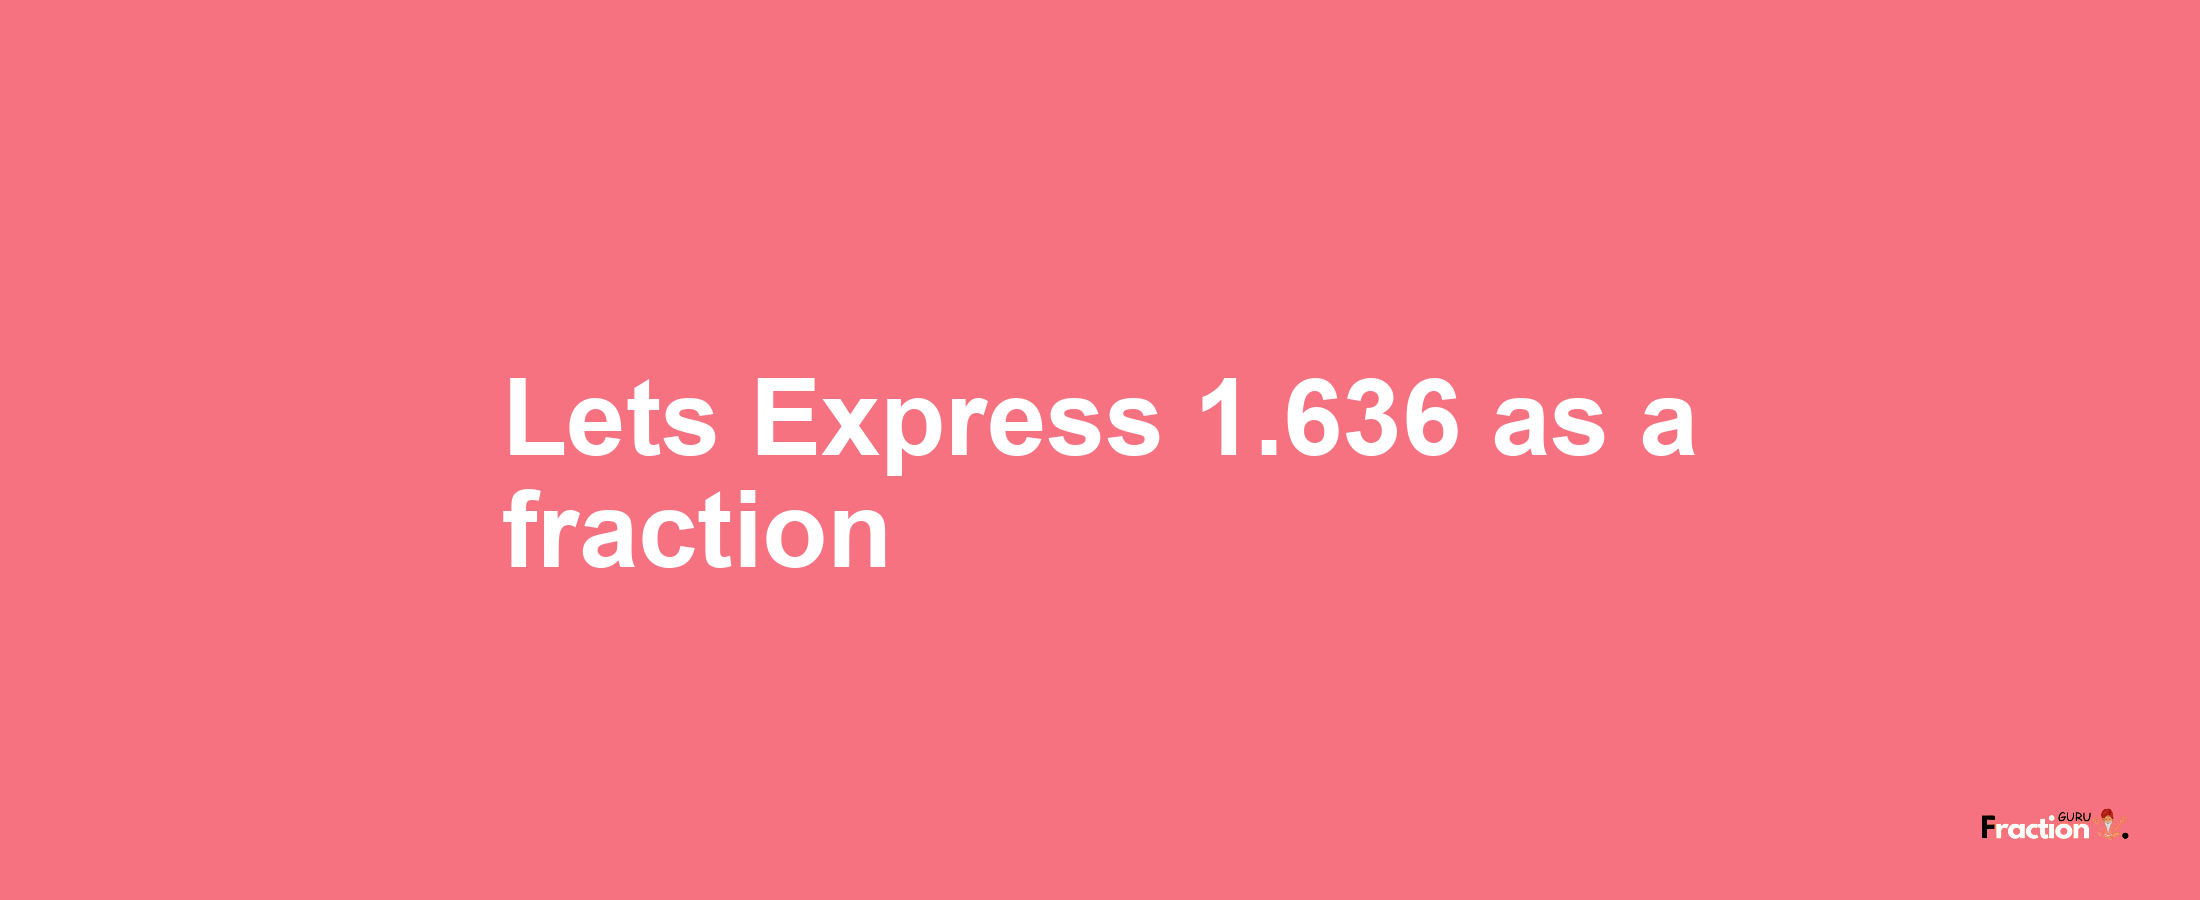 Lets Express 1.636 as afraction